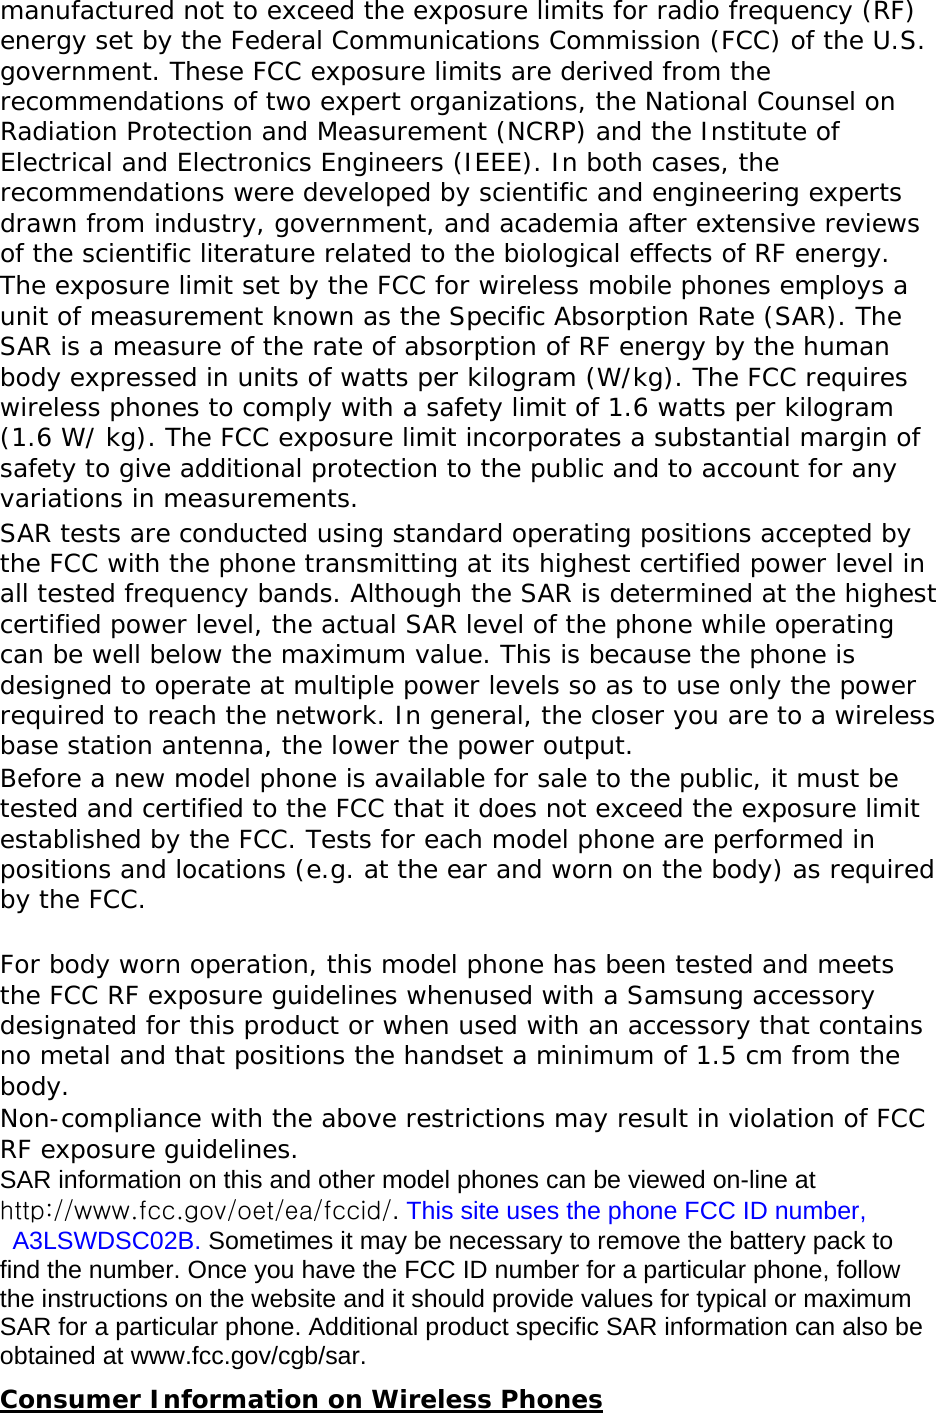 manufactured not to exceed the exposure limits for radio frequency (RF) energy set by the Federal Communications Commission (FCC) of the U.S. government. These FCC exposure limits are derived from the recommendations of two expert organizations, the National Counsel on Radiation Protection and Measurement (NCRP) and the Institute of Electrical and Electronics Engineers (IEEE). In both cases, the recommendations were developed by scientific and engineering experts drawn from industry, government, and academia after extensive reviews of the scientific literature related to the biological effects of RF energy. The exposure limit set by the FCC for wireless mobile phones employs a unit of measurement known as the Specific Absorption Rate (SAR). The SAR is a measure of the rate of absorption of RF energy by the human body expressed in units of watts per kilogram (W/kg). The FCC requires wireless phones to comply with a safety limit of 1.6 watts per kilogram (1.6 W/ kg). The FCC exposure limit incorporates a substantial margin of safety to give additional protection to the public and to account for any variations in measurements. SAR tests are conducted using standard operating positions accepted by the FCC with the phone transmitting at its highest certified power level in all tested frequency bands. Although the SAR is determined at the highest certified power level, the actual SAR level of the phone while operating can be well below the maximum value. This is because the phone is designed to operate at multiple power levels so as to use only the power required to reach the network. In general, the closer you are to a wireless base station antenna, the lower the power output. Before a new model phone is available for sale to the public, it must be tested and certified to the FCC that it does not exceed the exposure limit established by the FCC. Tests for each model phone are performed in positions and locations (e.g. at the ear and worn on the body) as required by the FCC.    For body worn operation, this model phone has been tested and meets the FCC RF exposure guidelines whenused with a Samsung accessory designated for this product or when used with an accessory that contains no metal and that positions the handset a minimum of 1.5 cm from the body.  Non-compliance with the above restrictions may result in violation of FCC RF exposure guidelines. SAR information on this and other model phones can be viewed on-line at http://www.fcc.gov/oet/ea/fccid/. This site uses the phone FCC ID number,  A3LSWDSC02B. Sometimes it may be necessary to remove the battery pack to find the number. Once you have the FCC ID number for a particular phone, follow the instructions on the website and it should provide values for typical or maximum SAR for a particular phone. Additional product specific SAR information can also be obtained at www.fcc.gov/cgb/sar. Consumer Information on Wireless Phones 